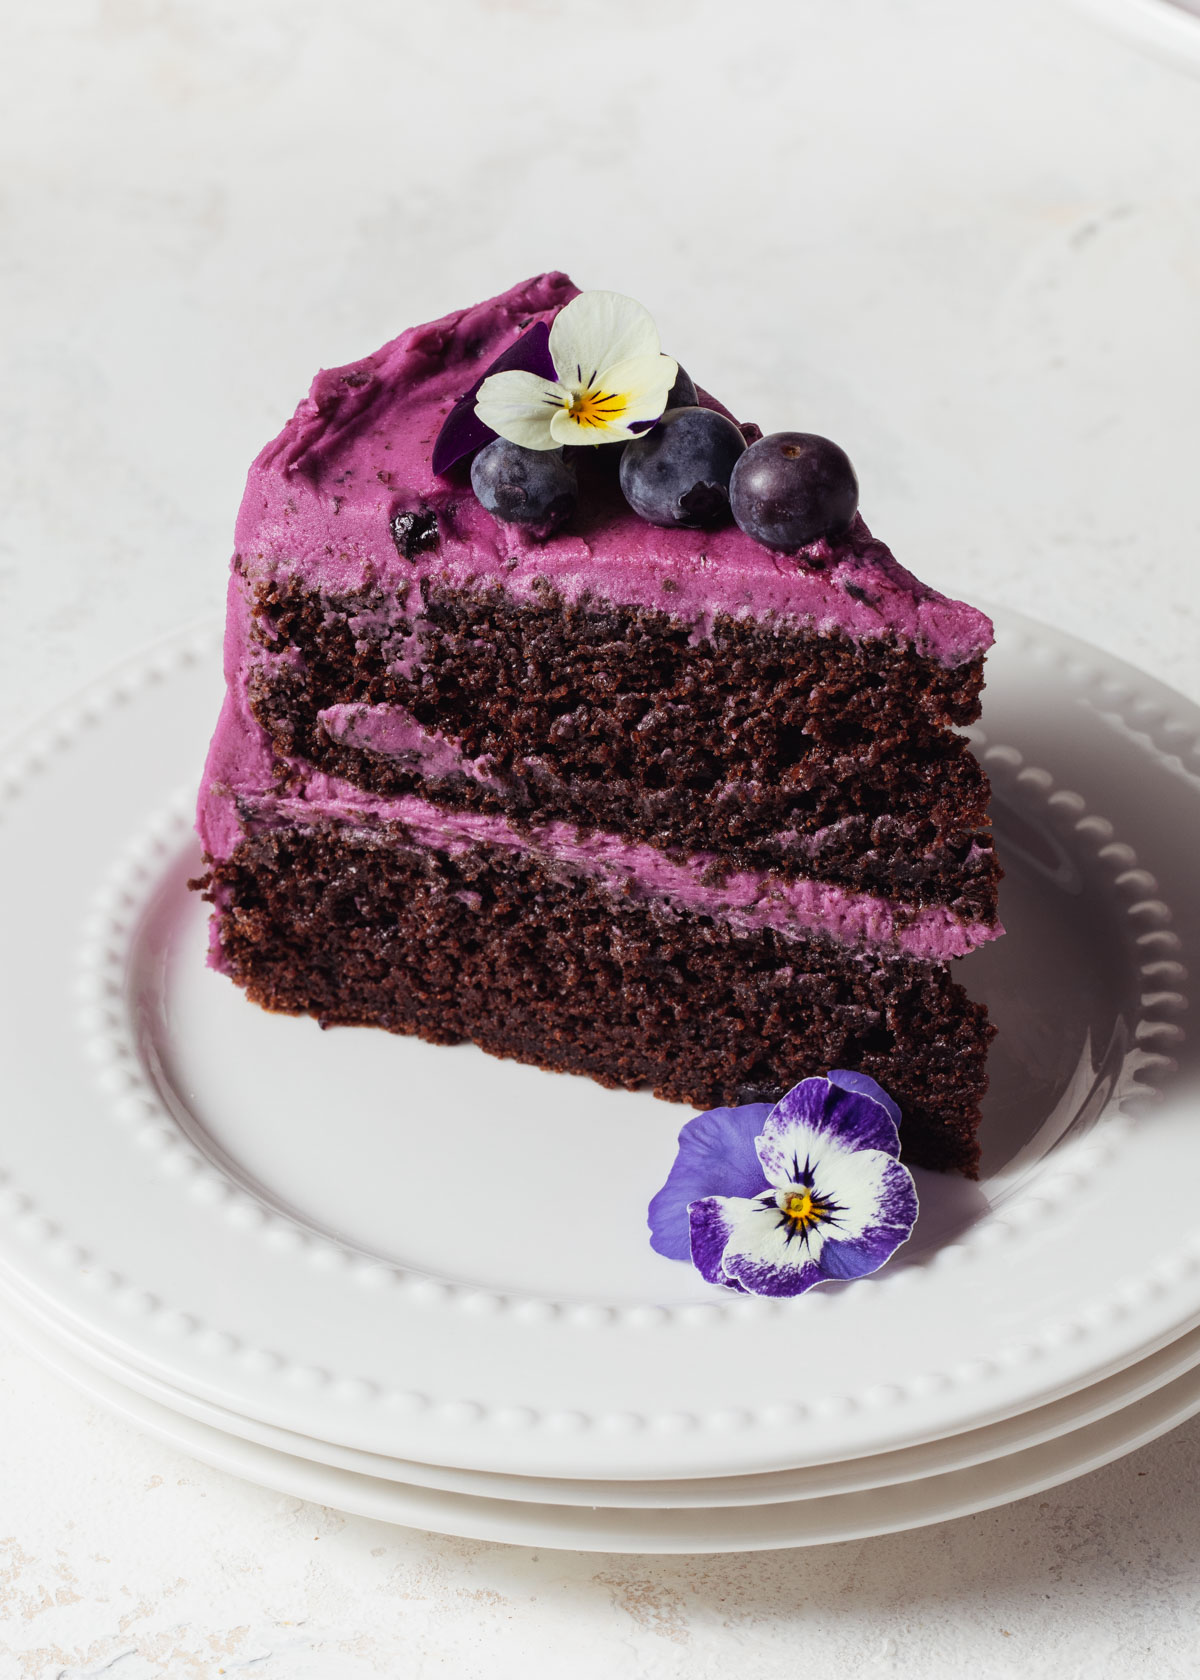 A slice of blueberry chocolate cake with fresh blueberries on top